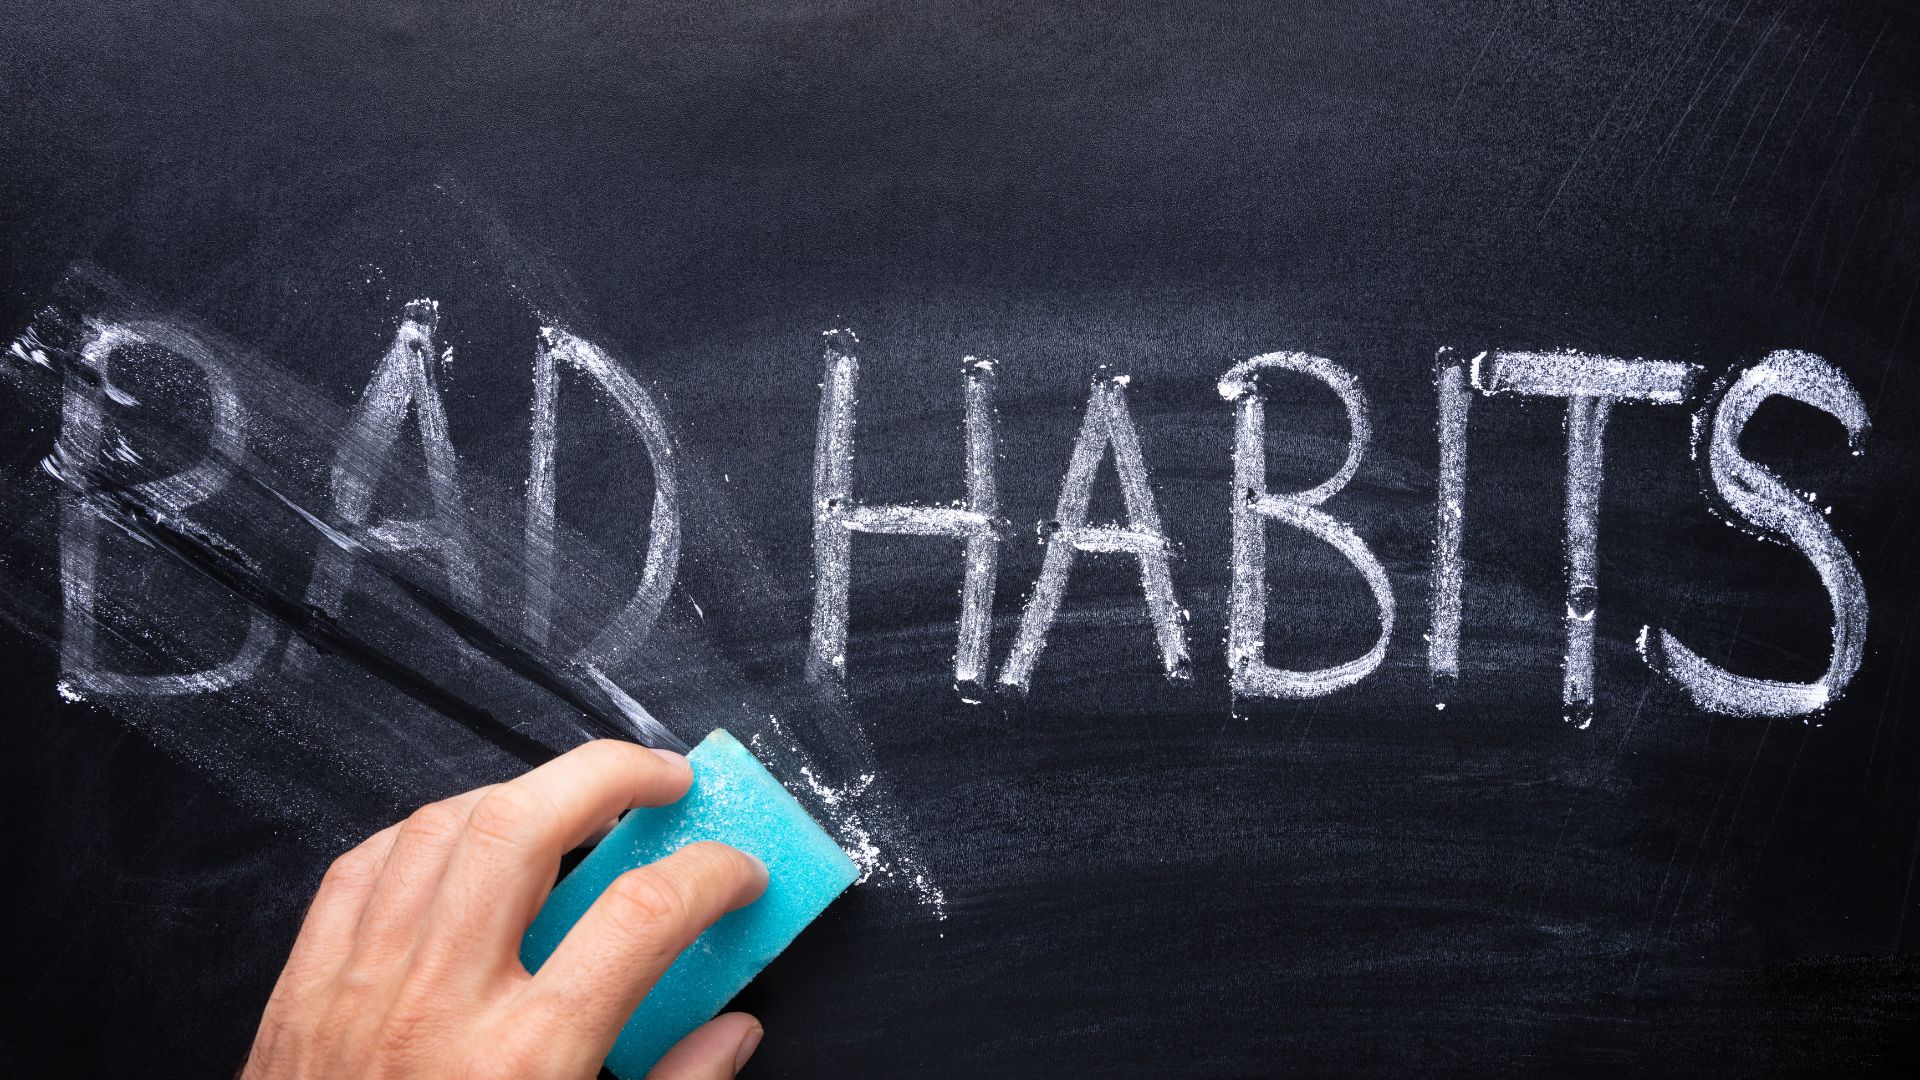 The words Bad Habits being erased from a chalkboard.